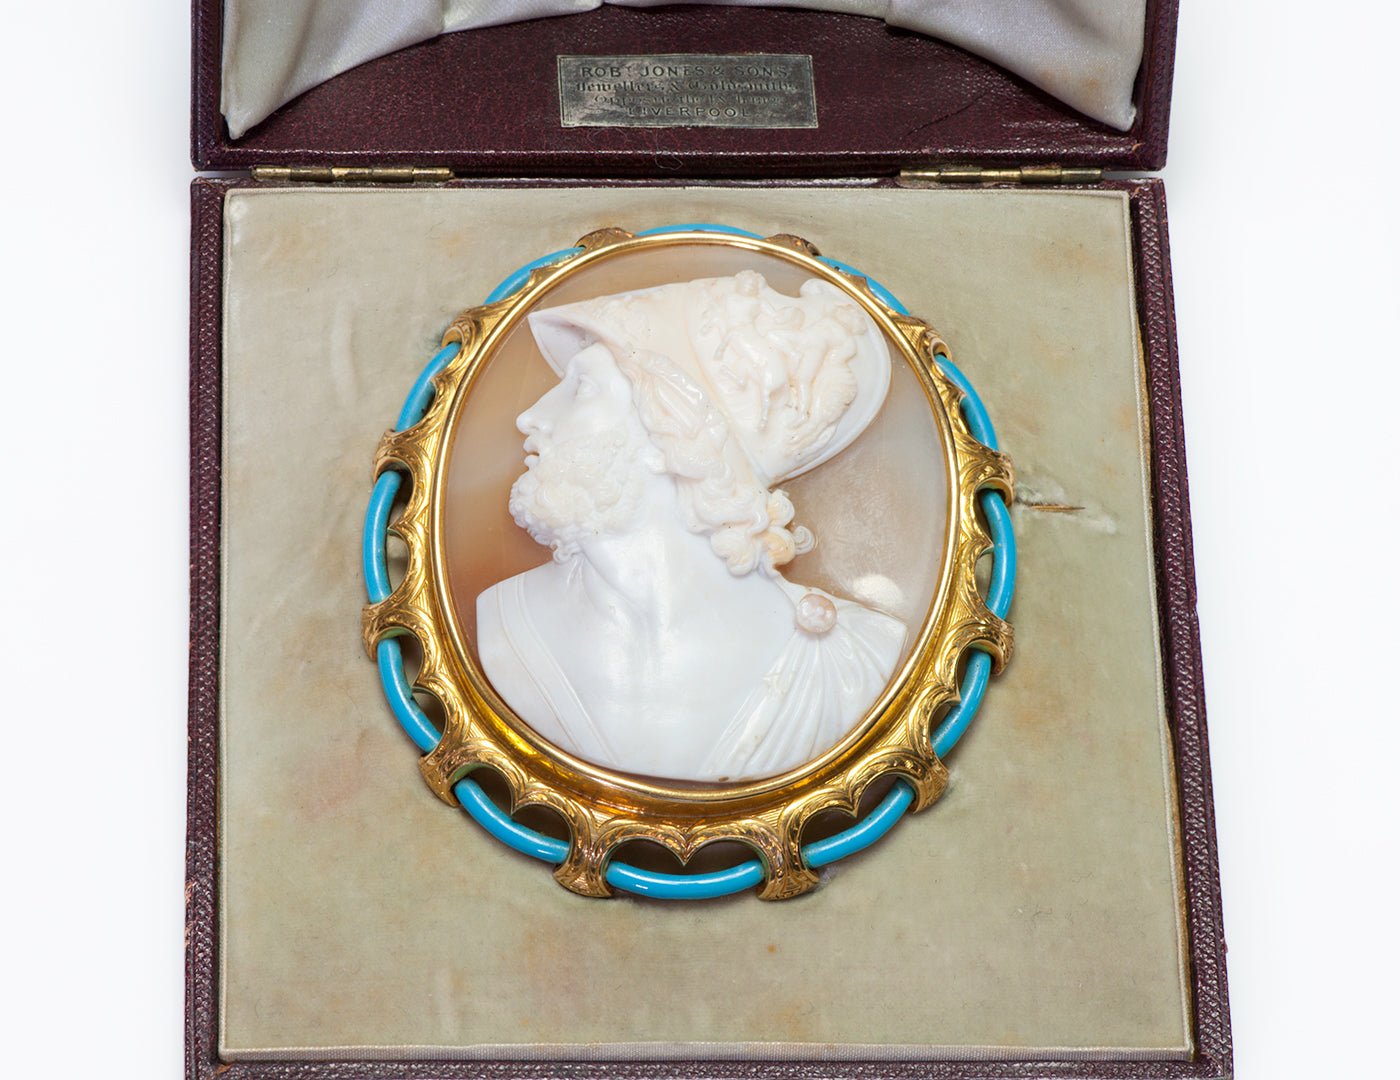 Antique Gold Enamel Large Stone Shell Cameo Brooch